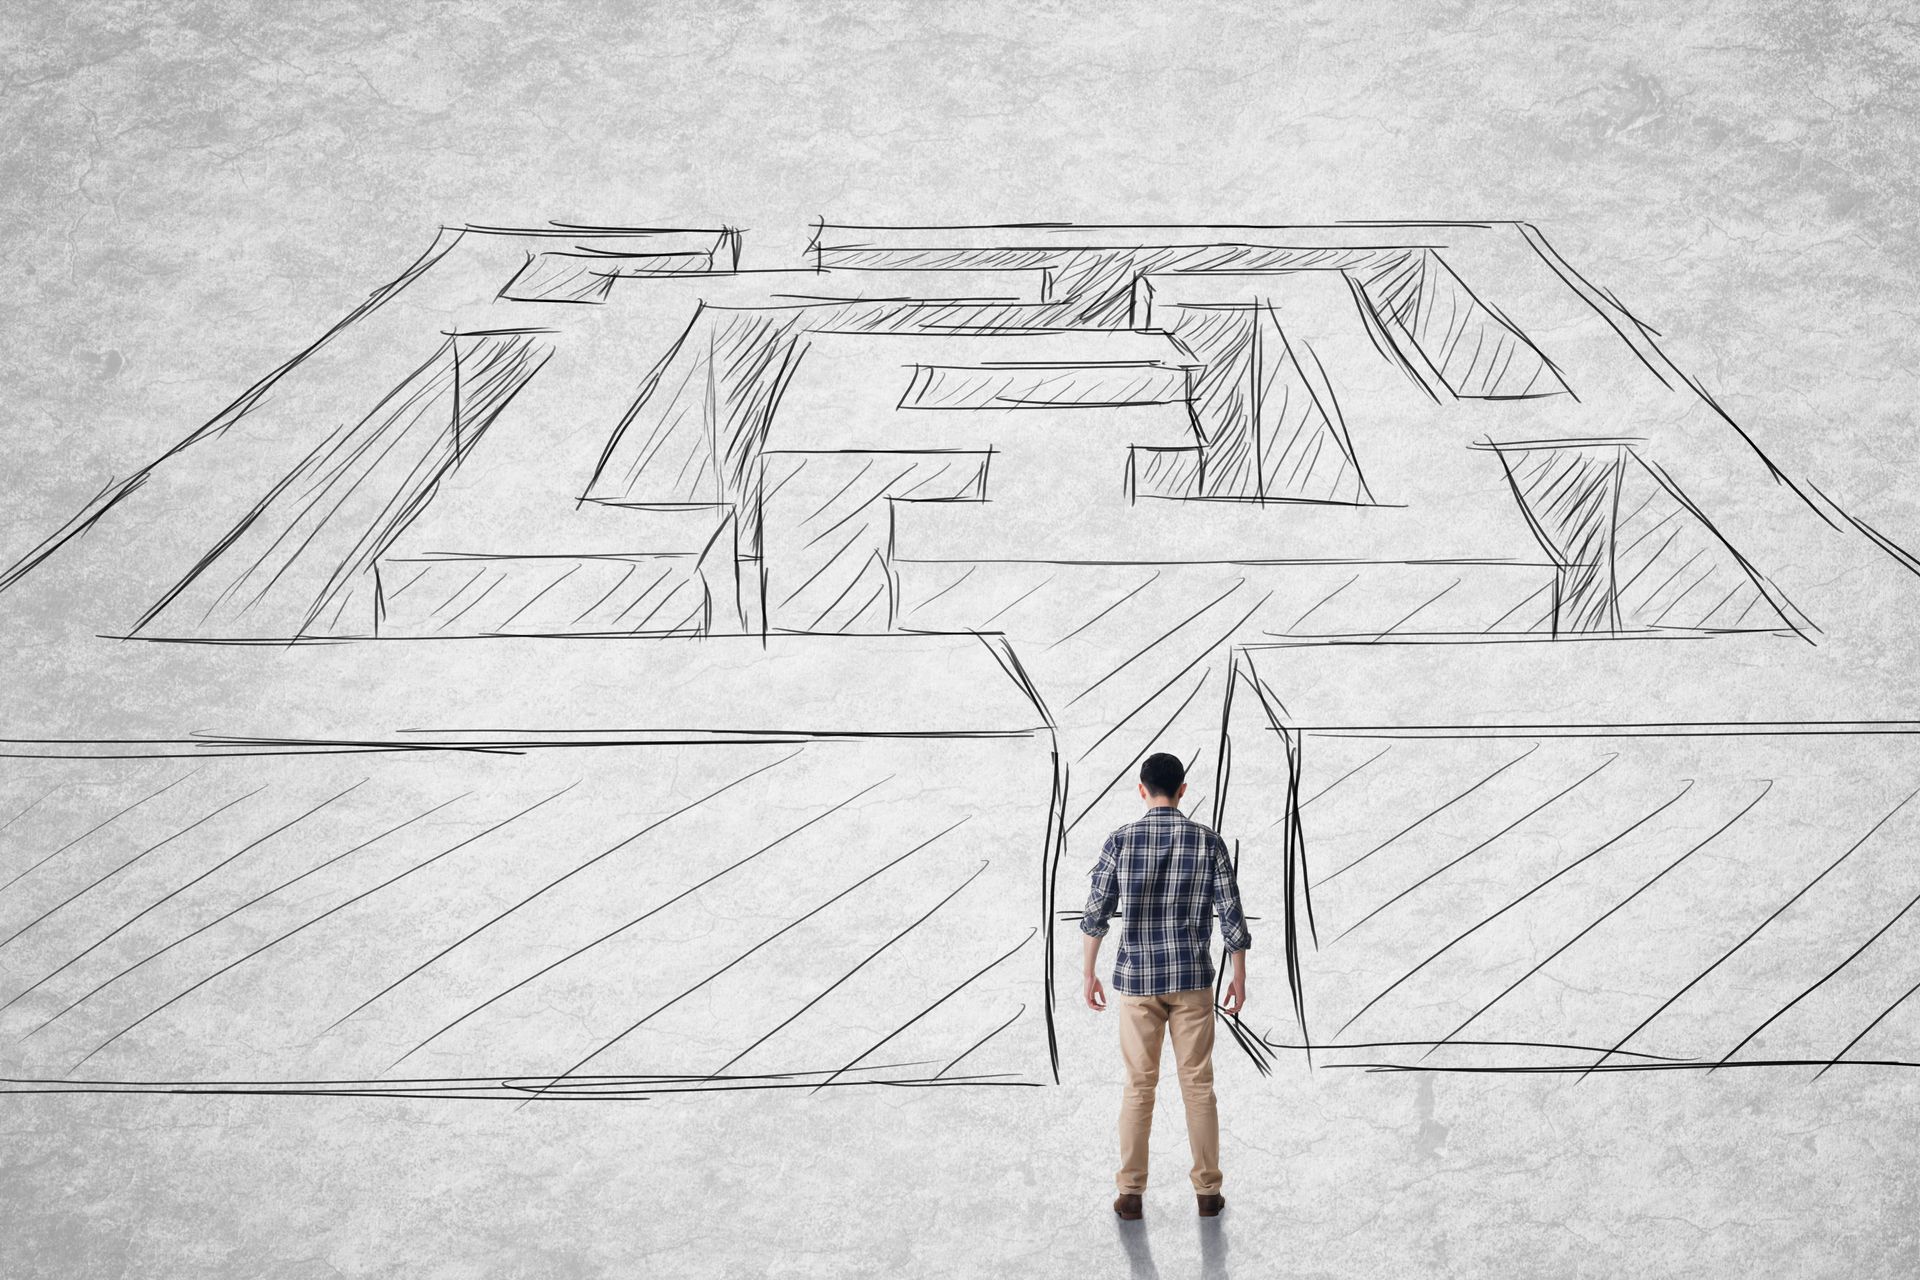 A man prepares to enter a penned drawing of a maze.